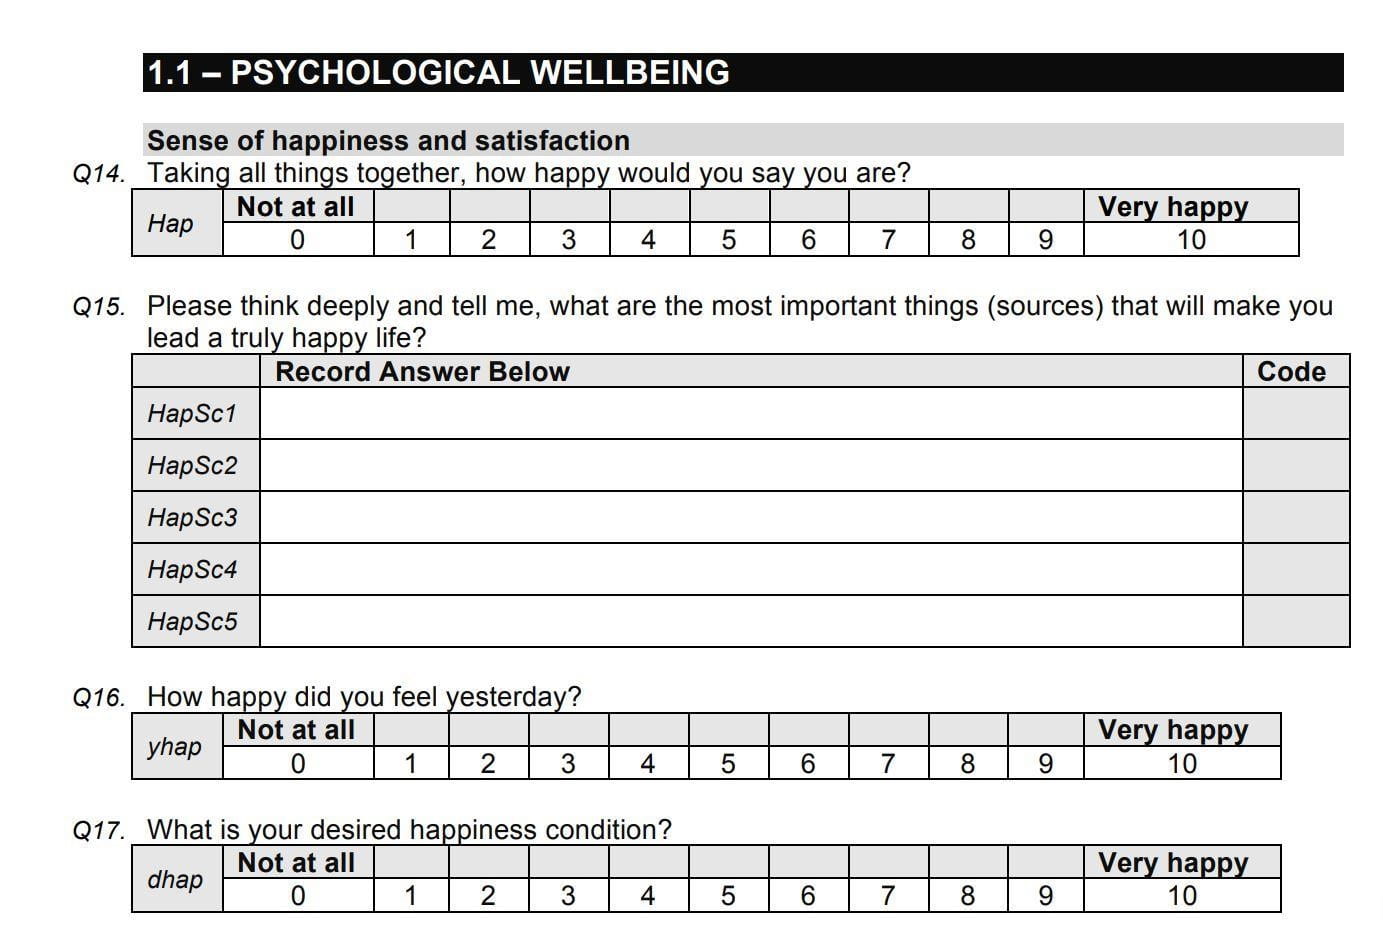 Image of psychological welbeing survey used by Bhutanese goverment to help gauge Gross National Happiness